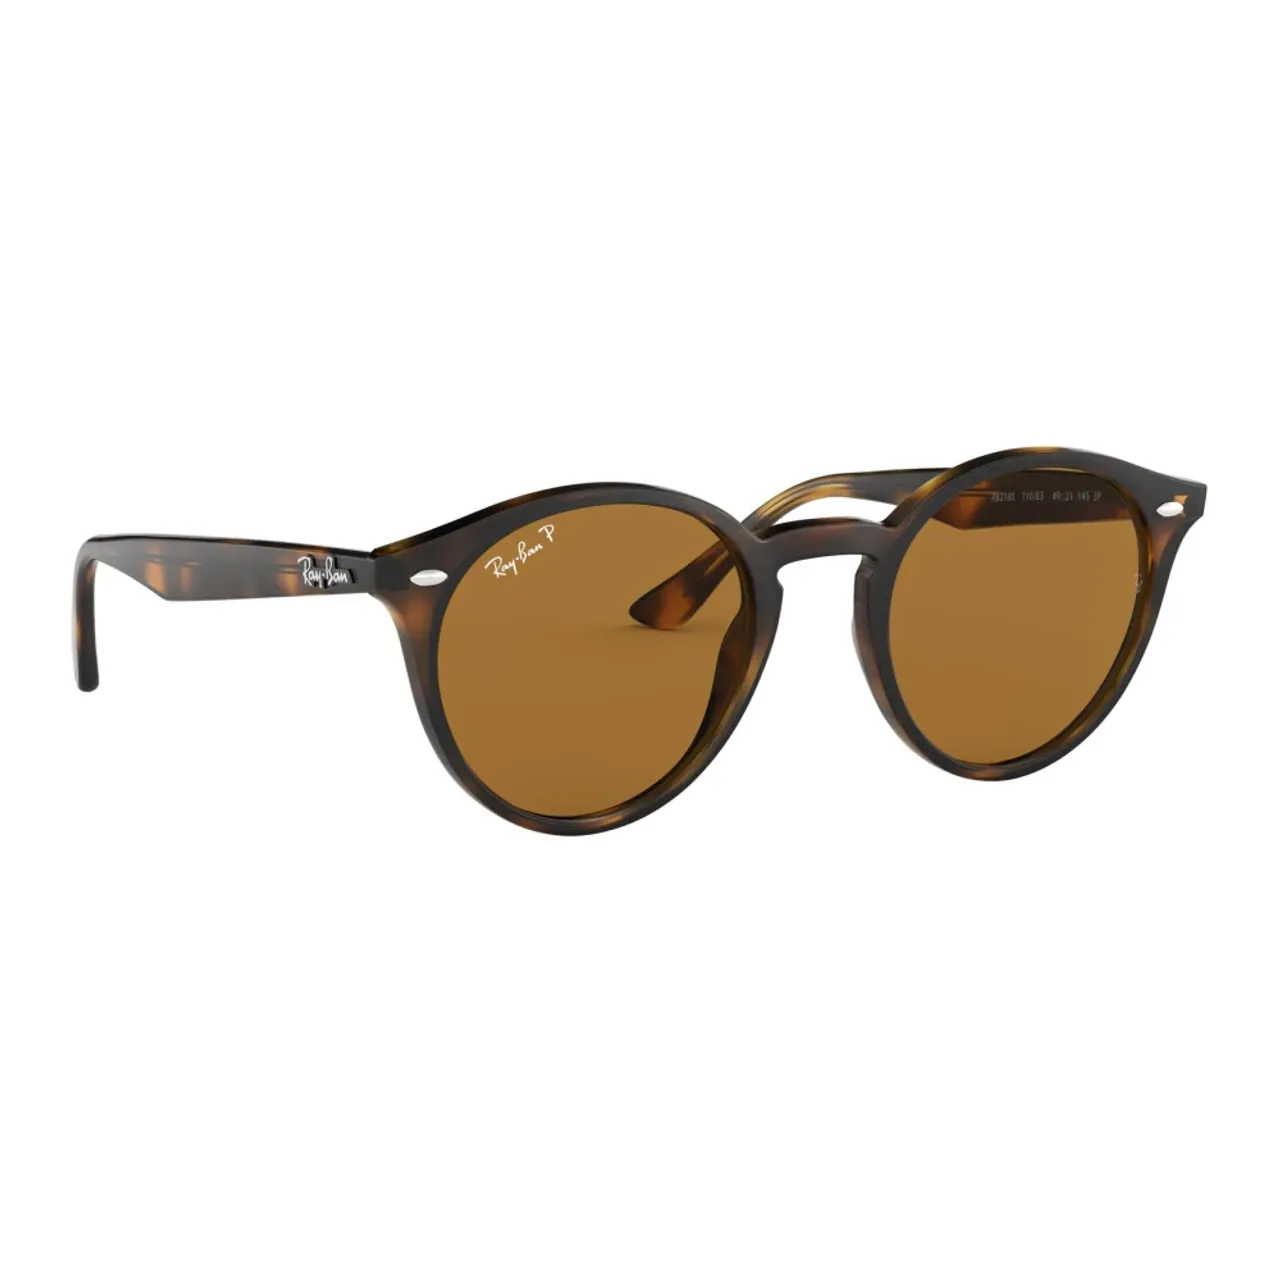 Ray-Ban , Rb2180 Polarized Sunglasses ,Brown female, Sizes: